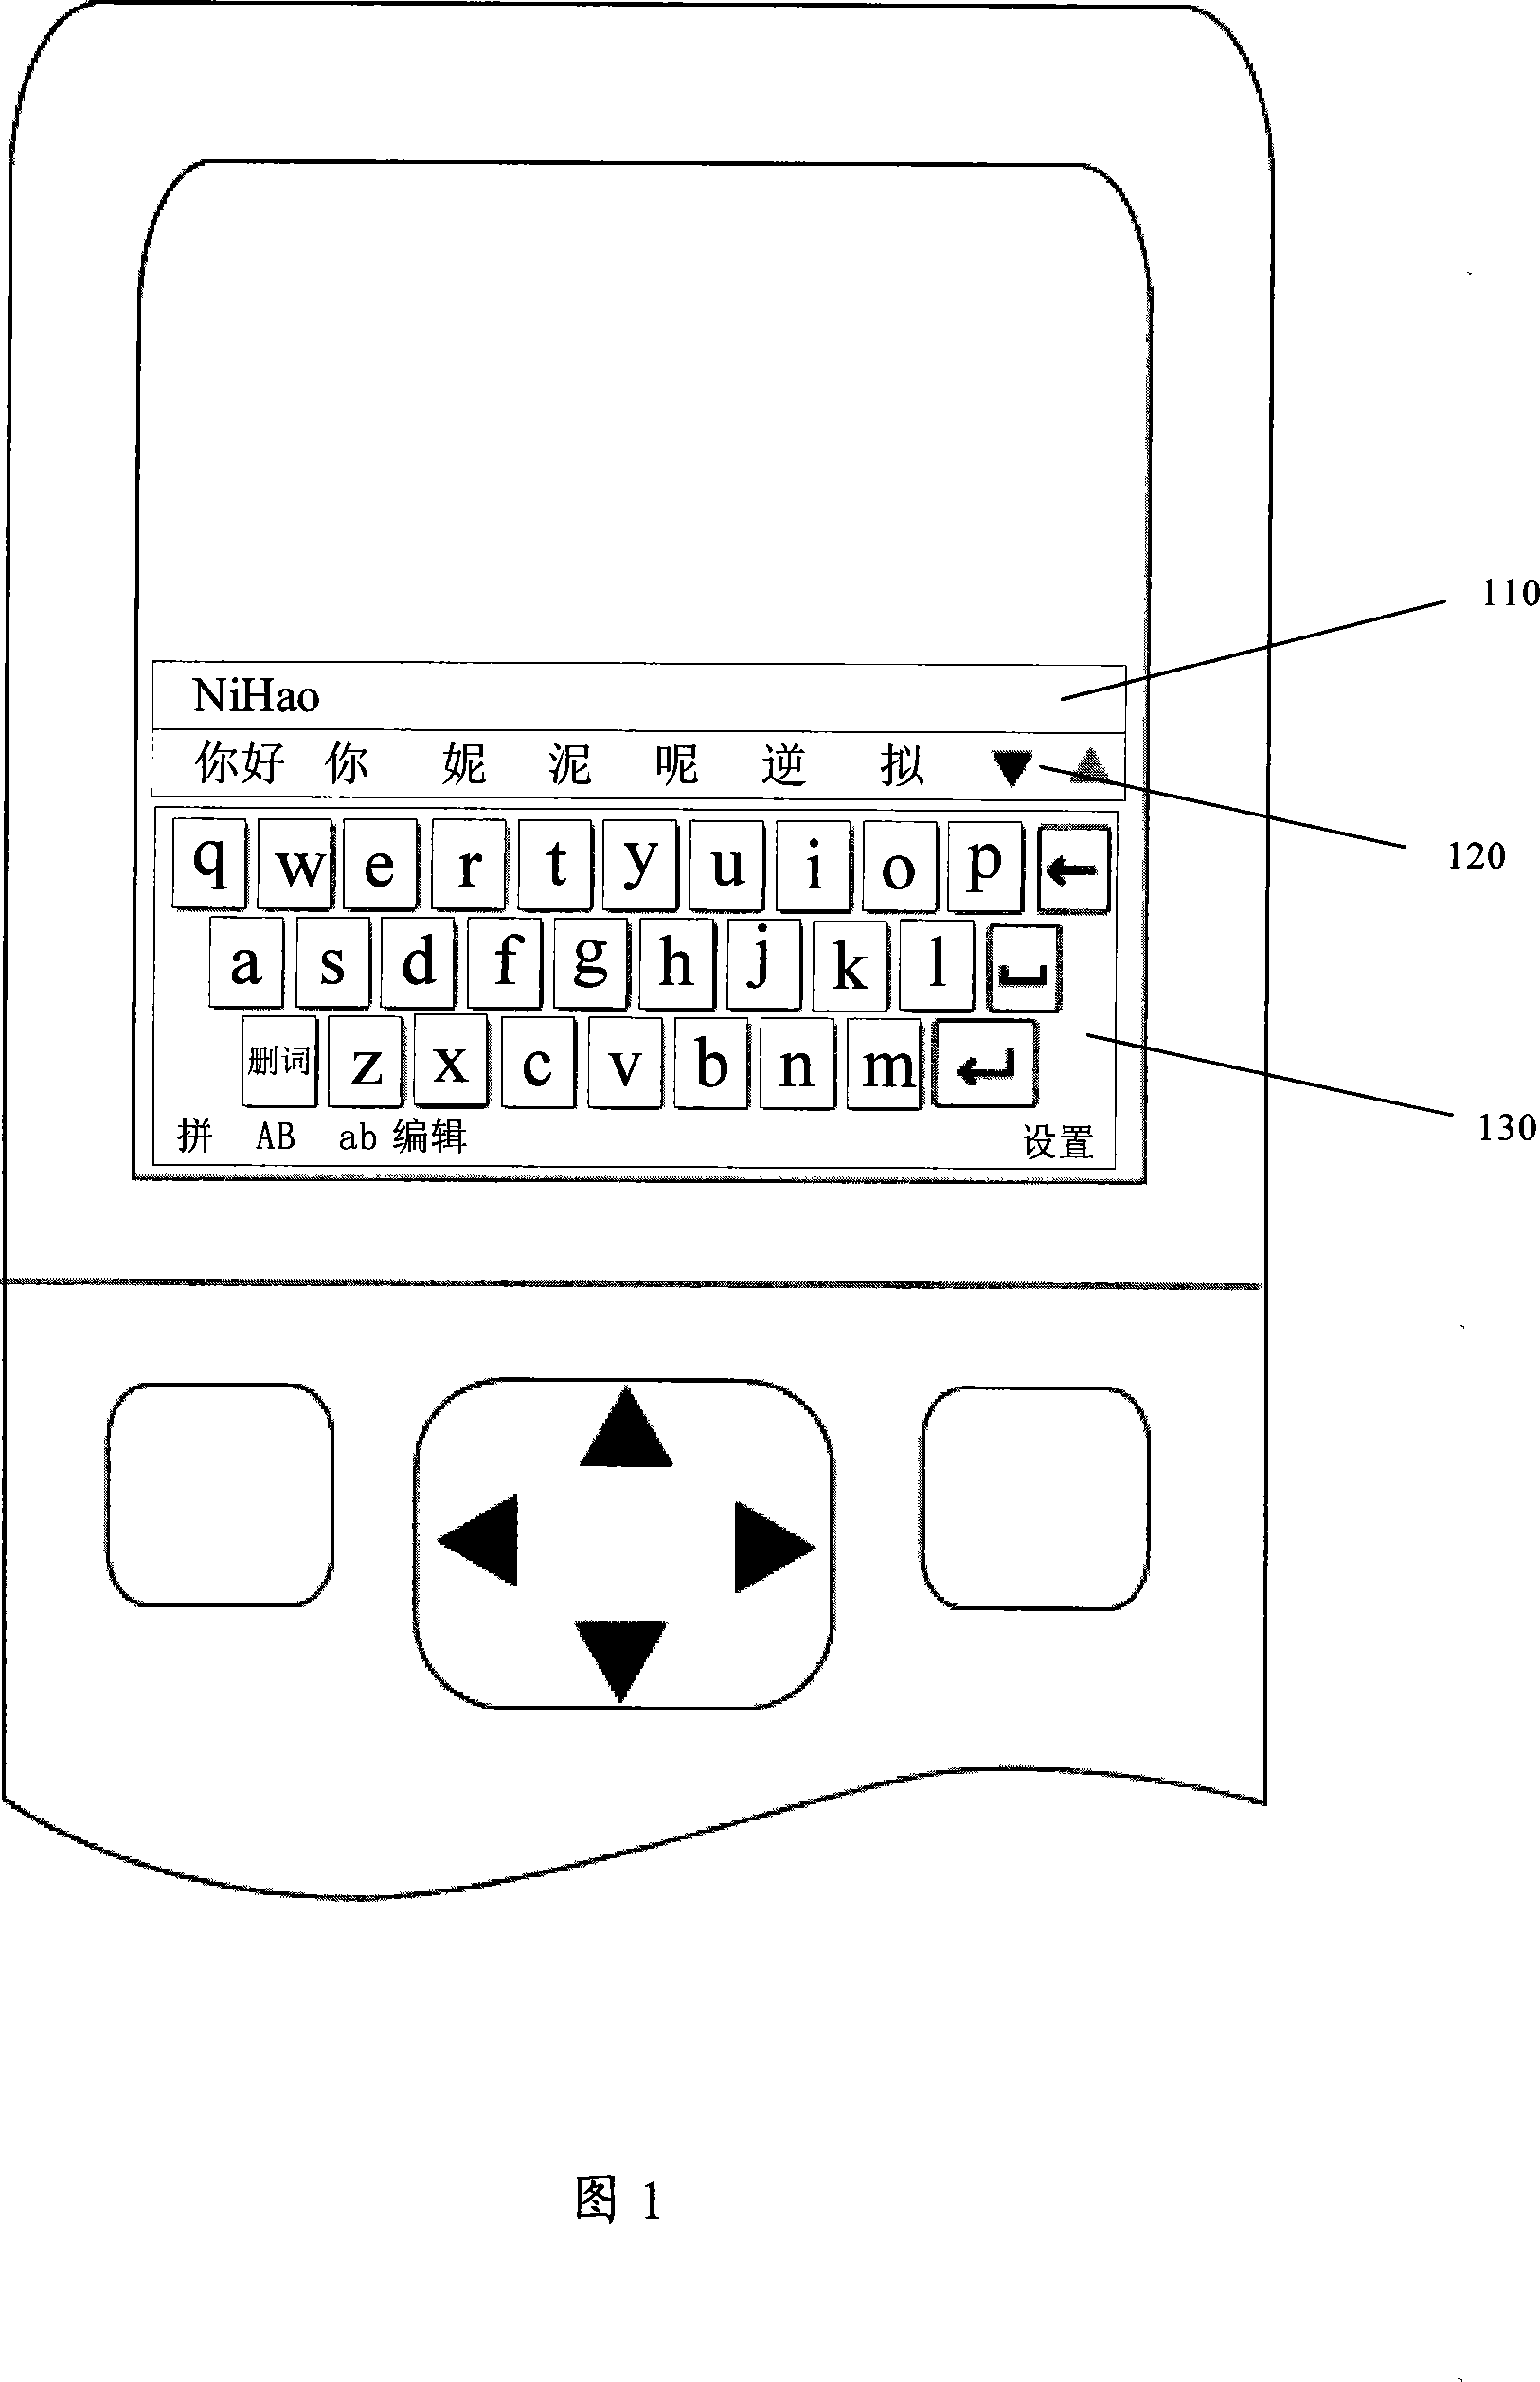 Soft keyboard layout fast inputting method on touch screen